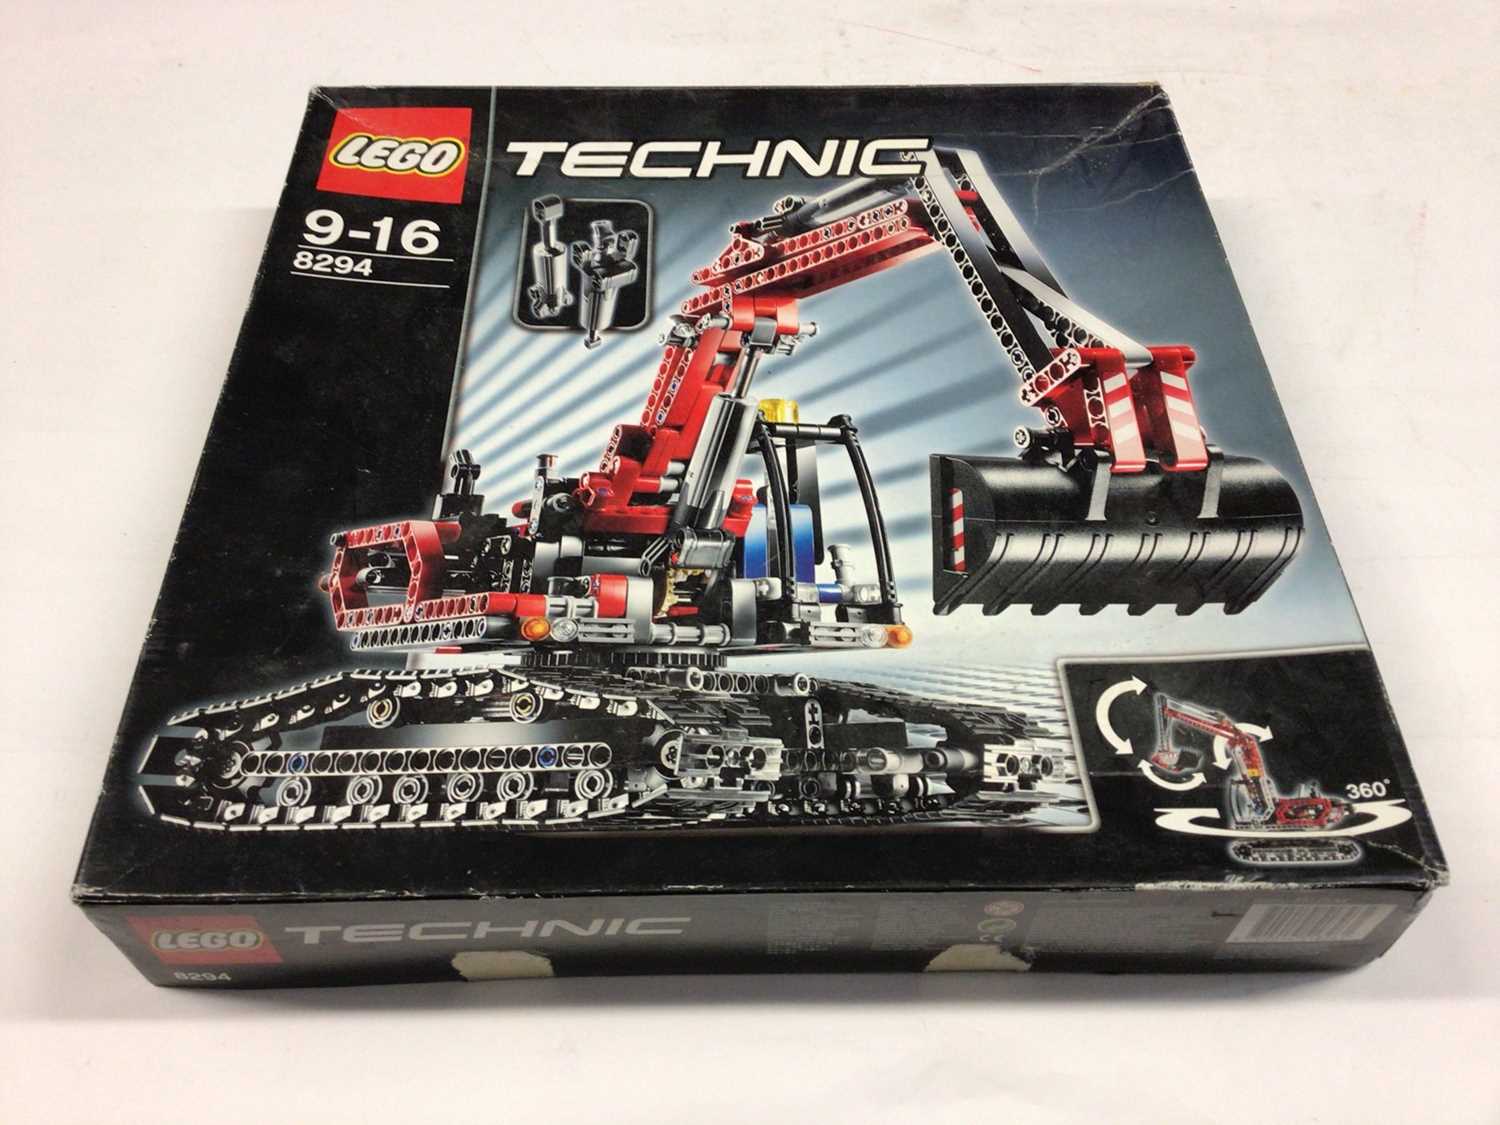 Lego Technic 8294 Excavator with instructions, Boxed